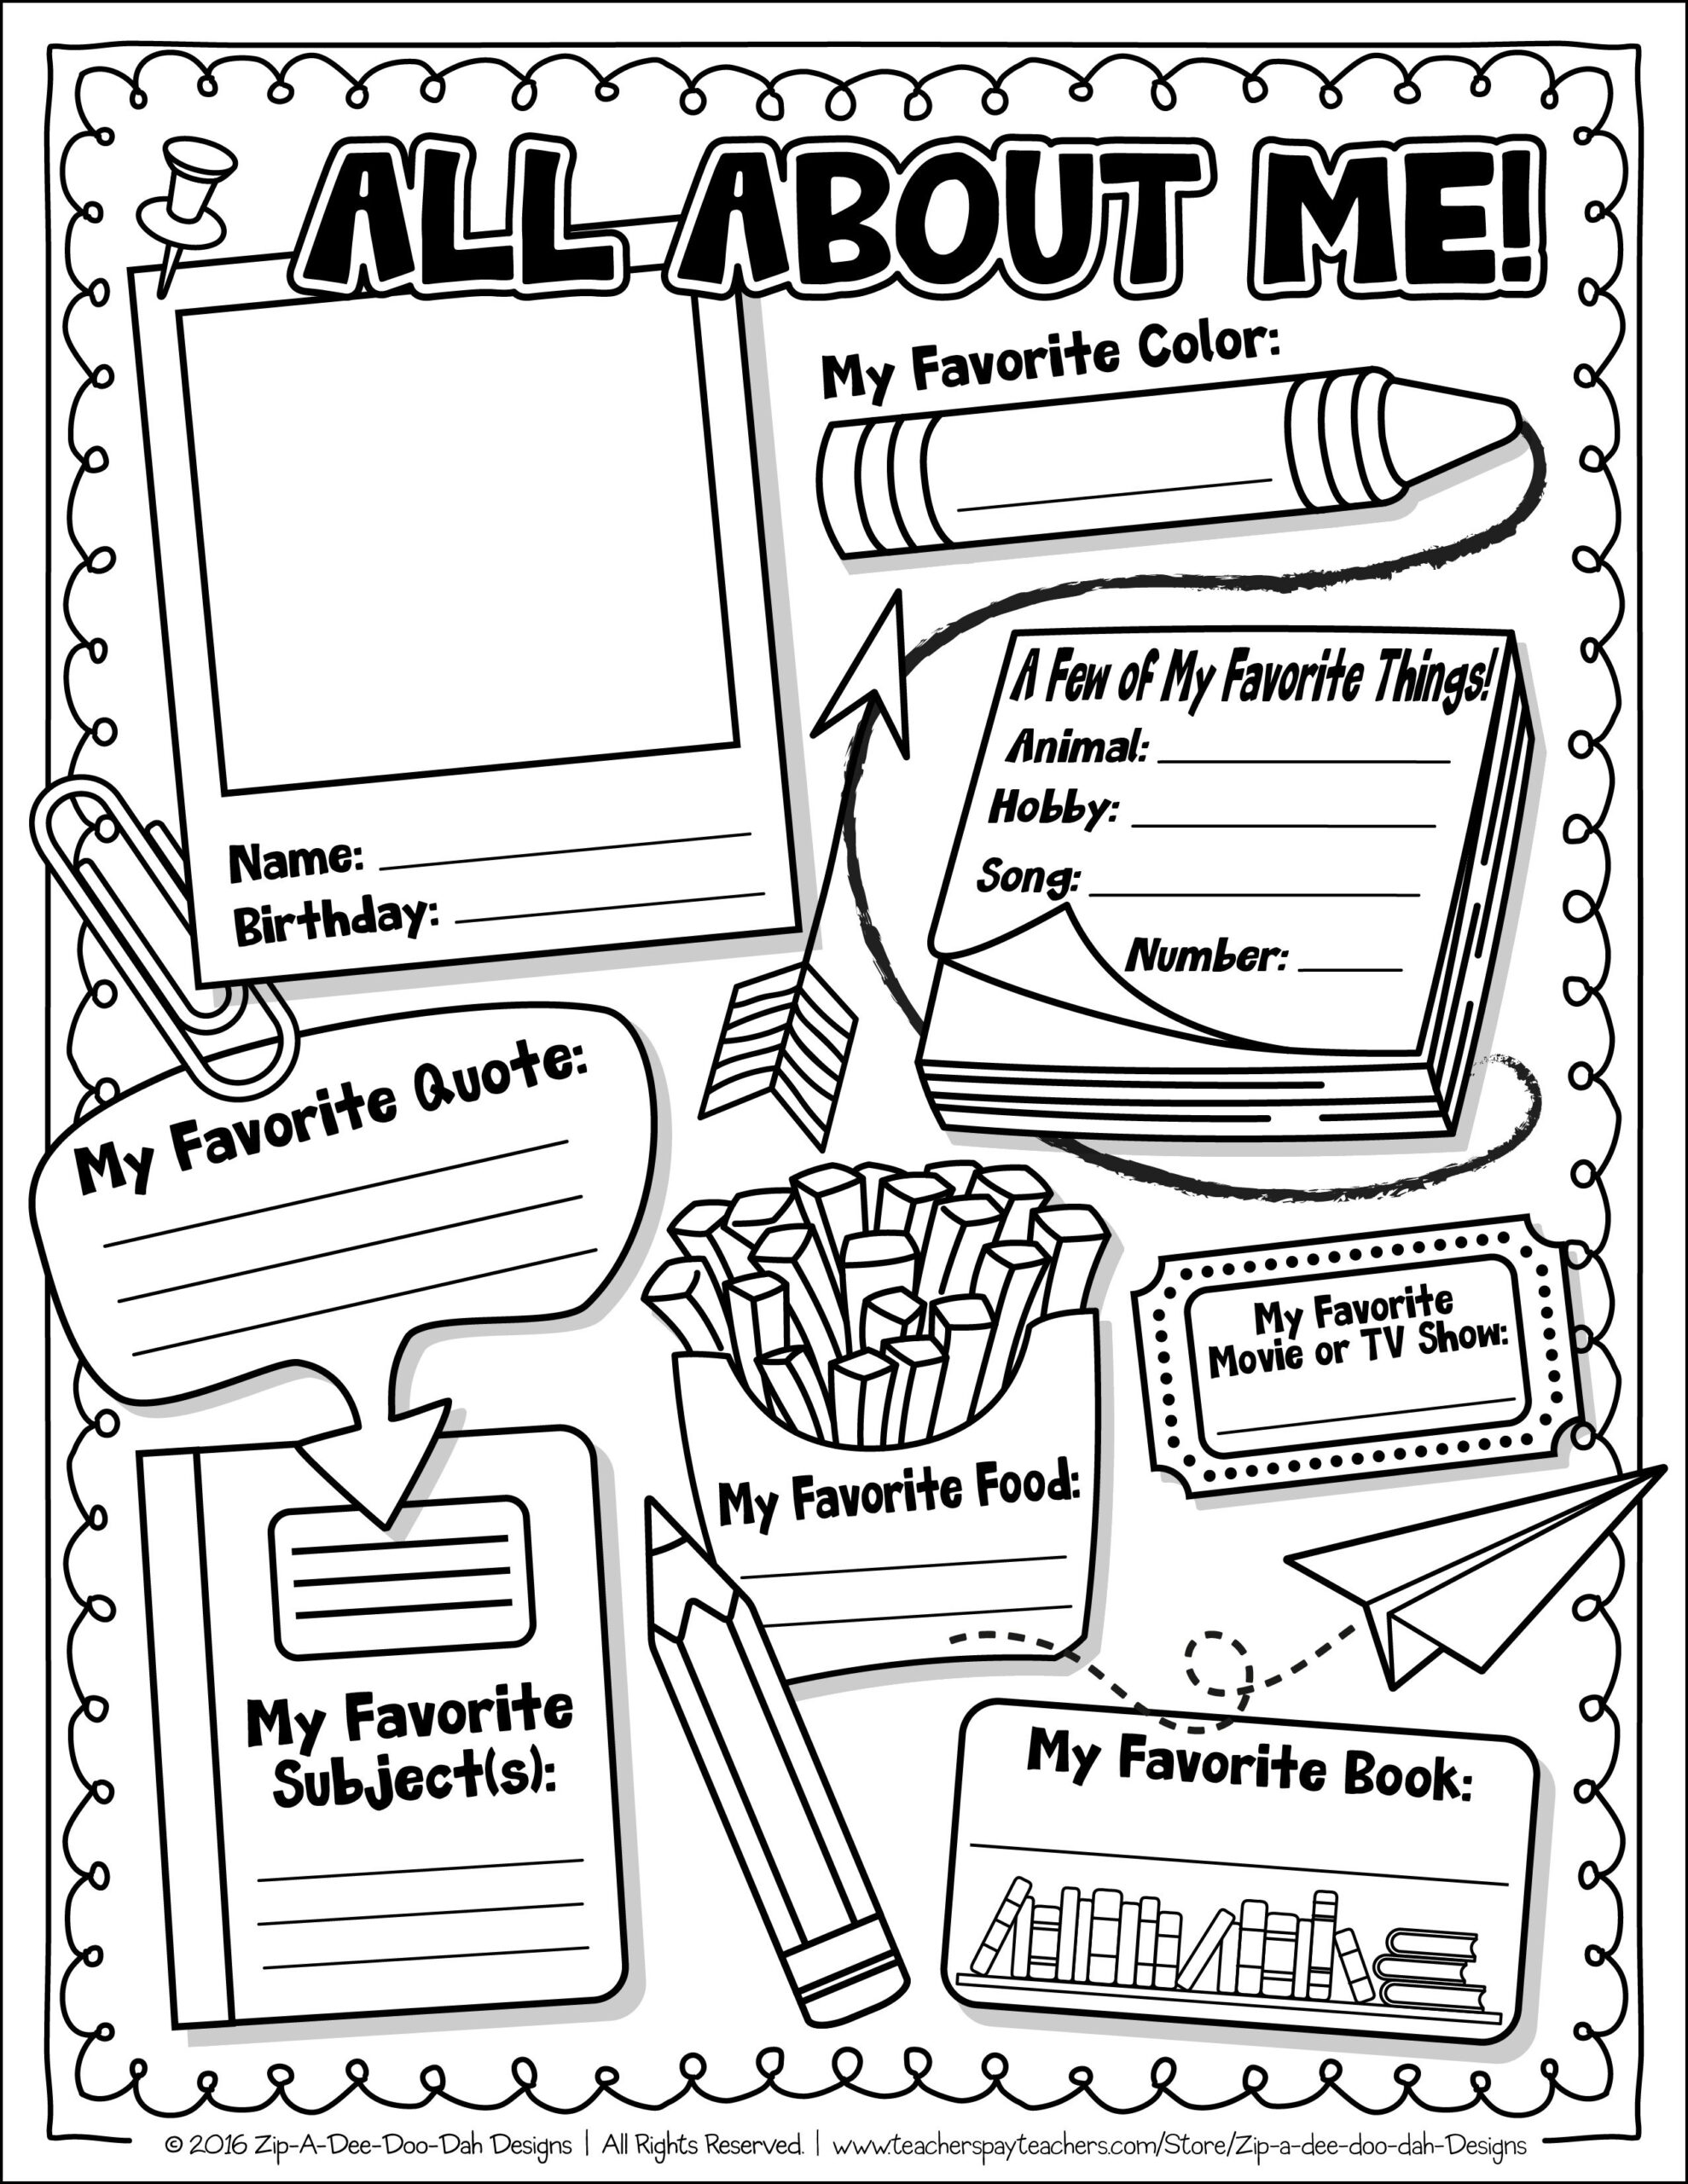 all-about-me-printable-sheet-all-about-me-worksheets